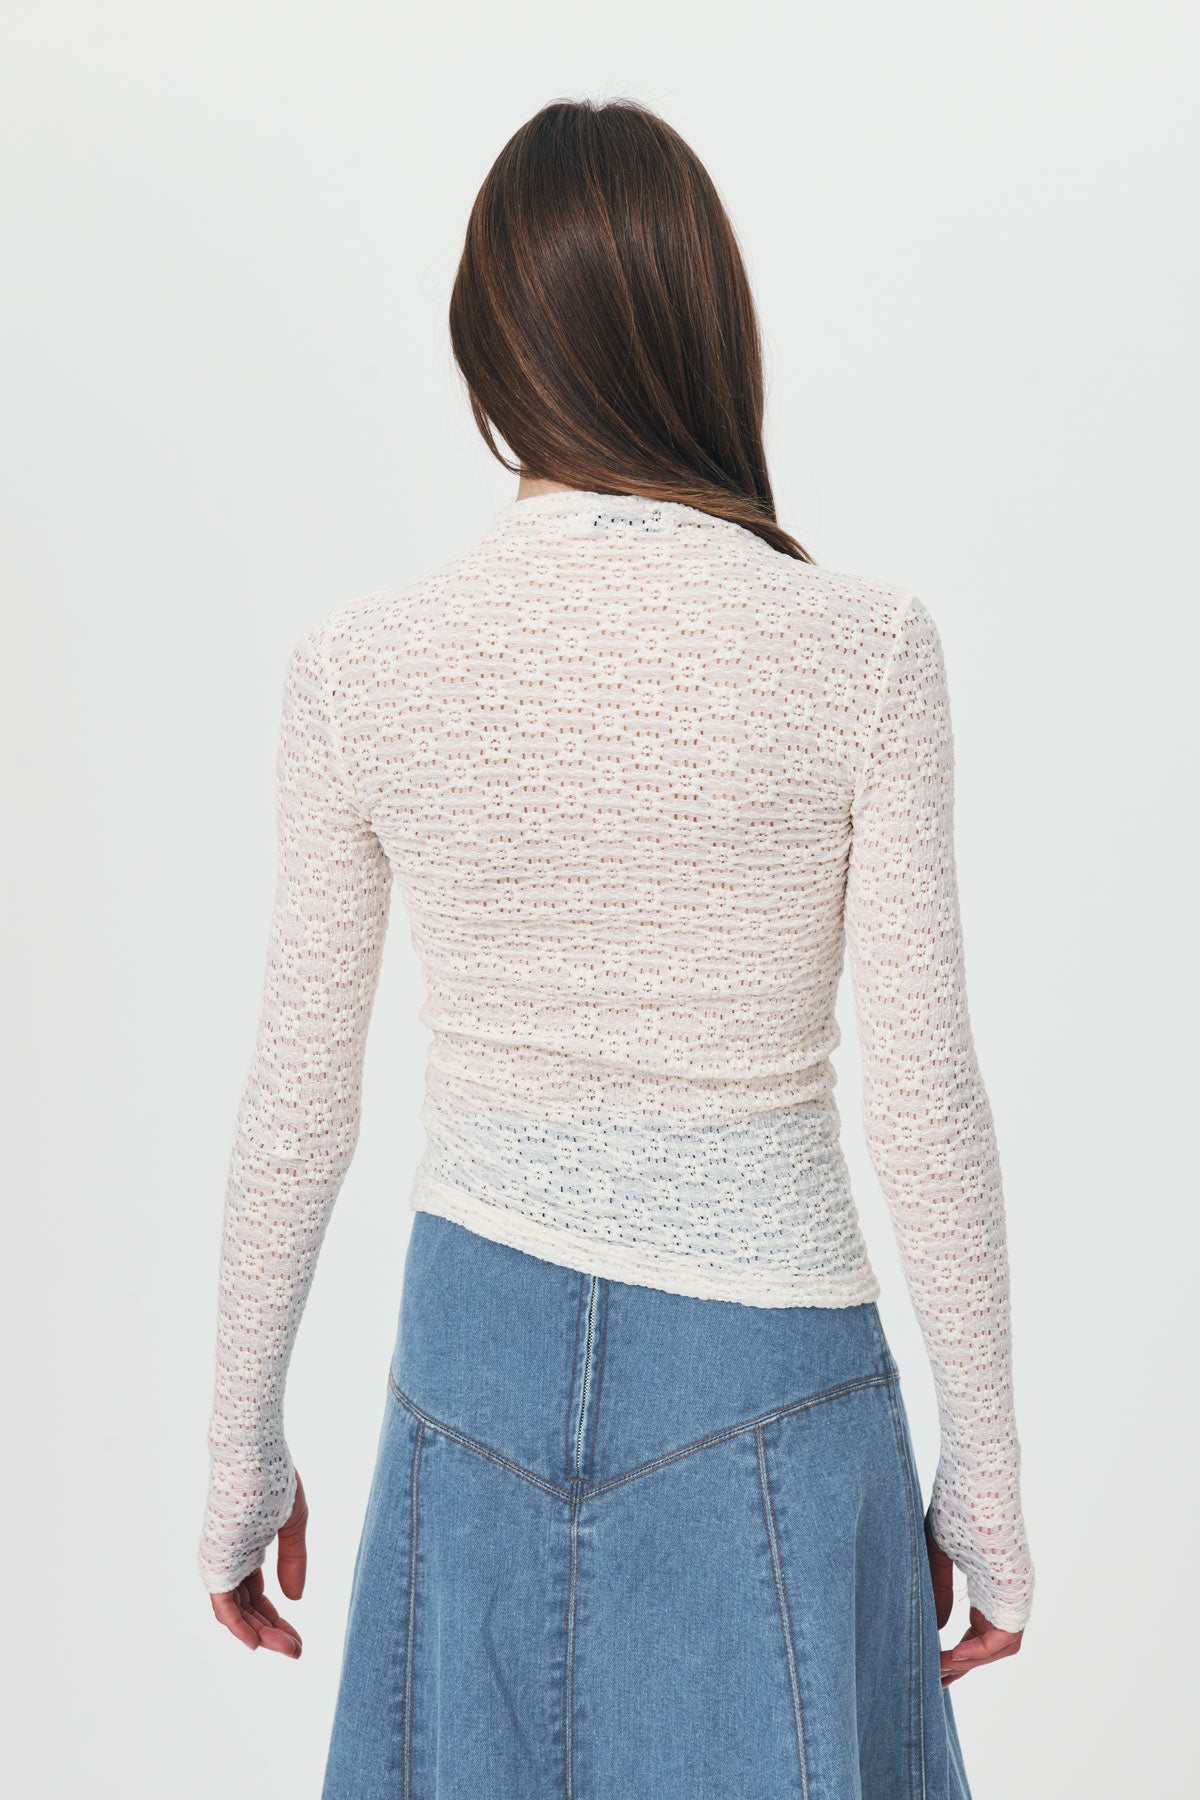 Galo Daisy Lace Top